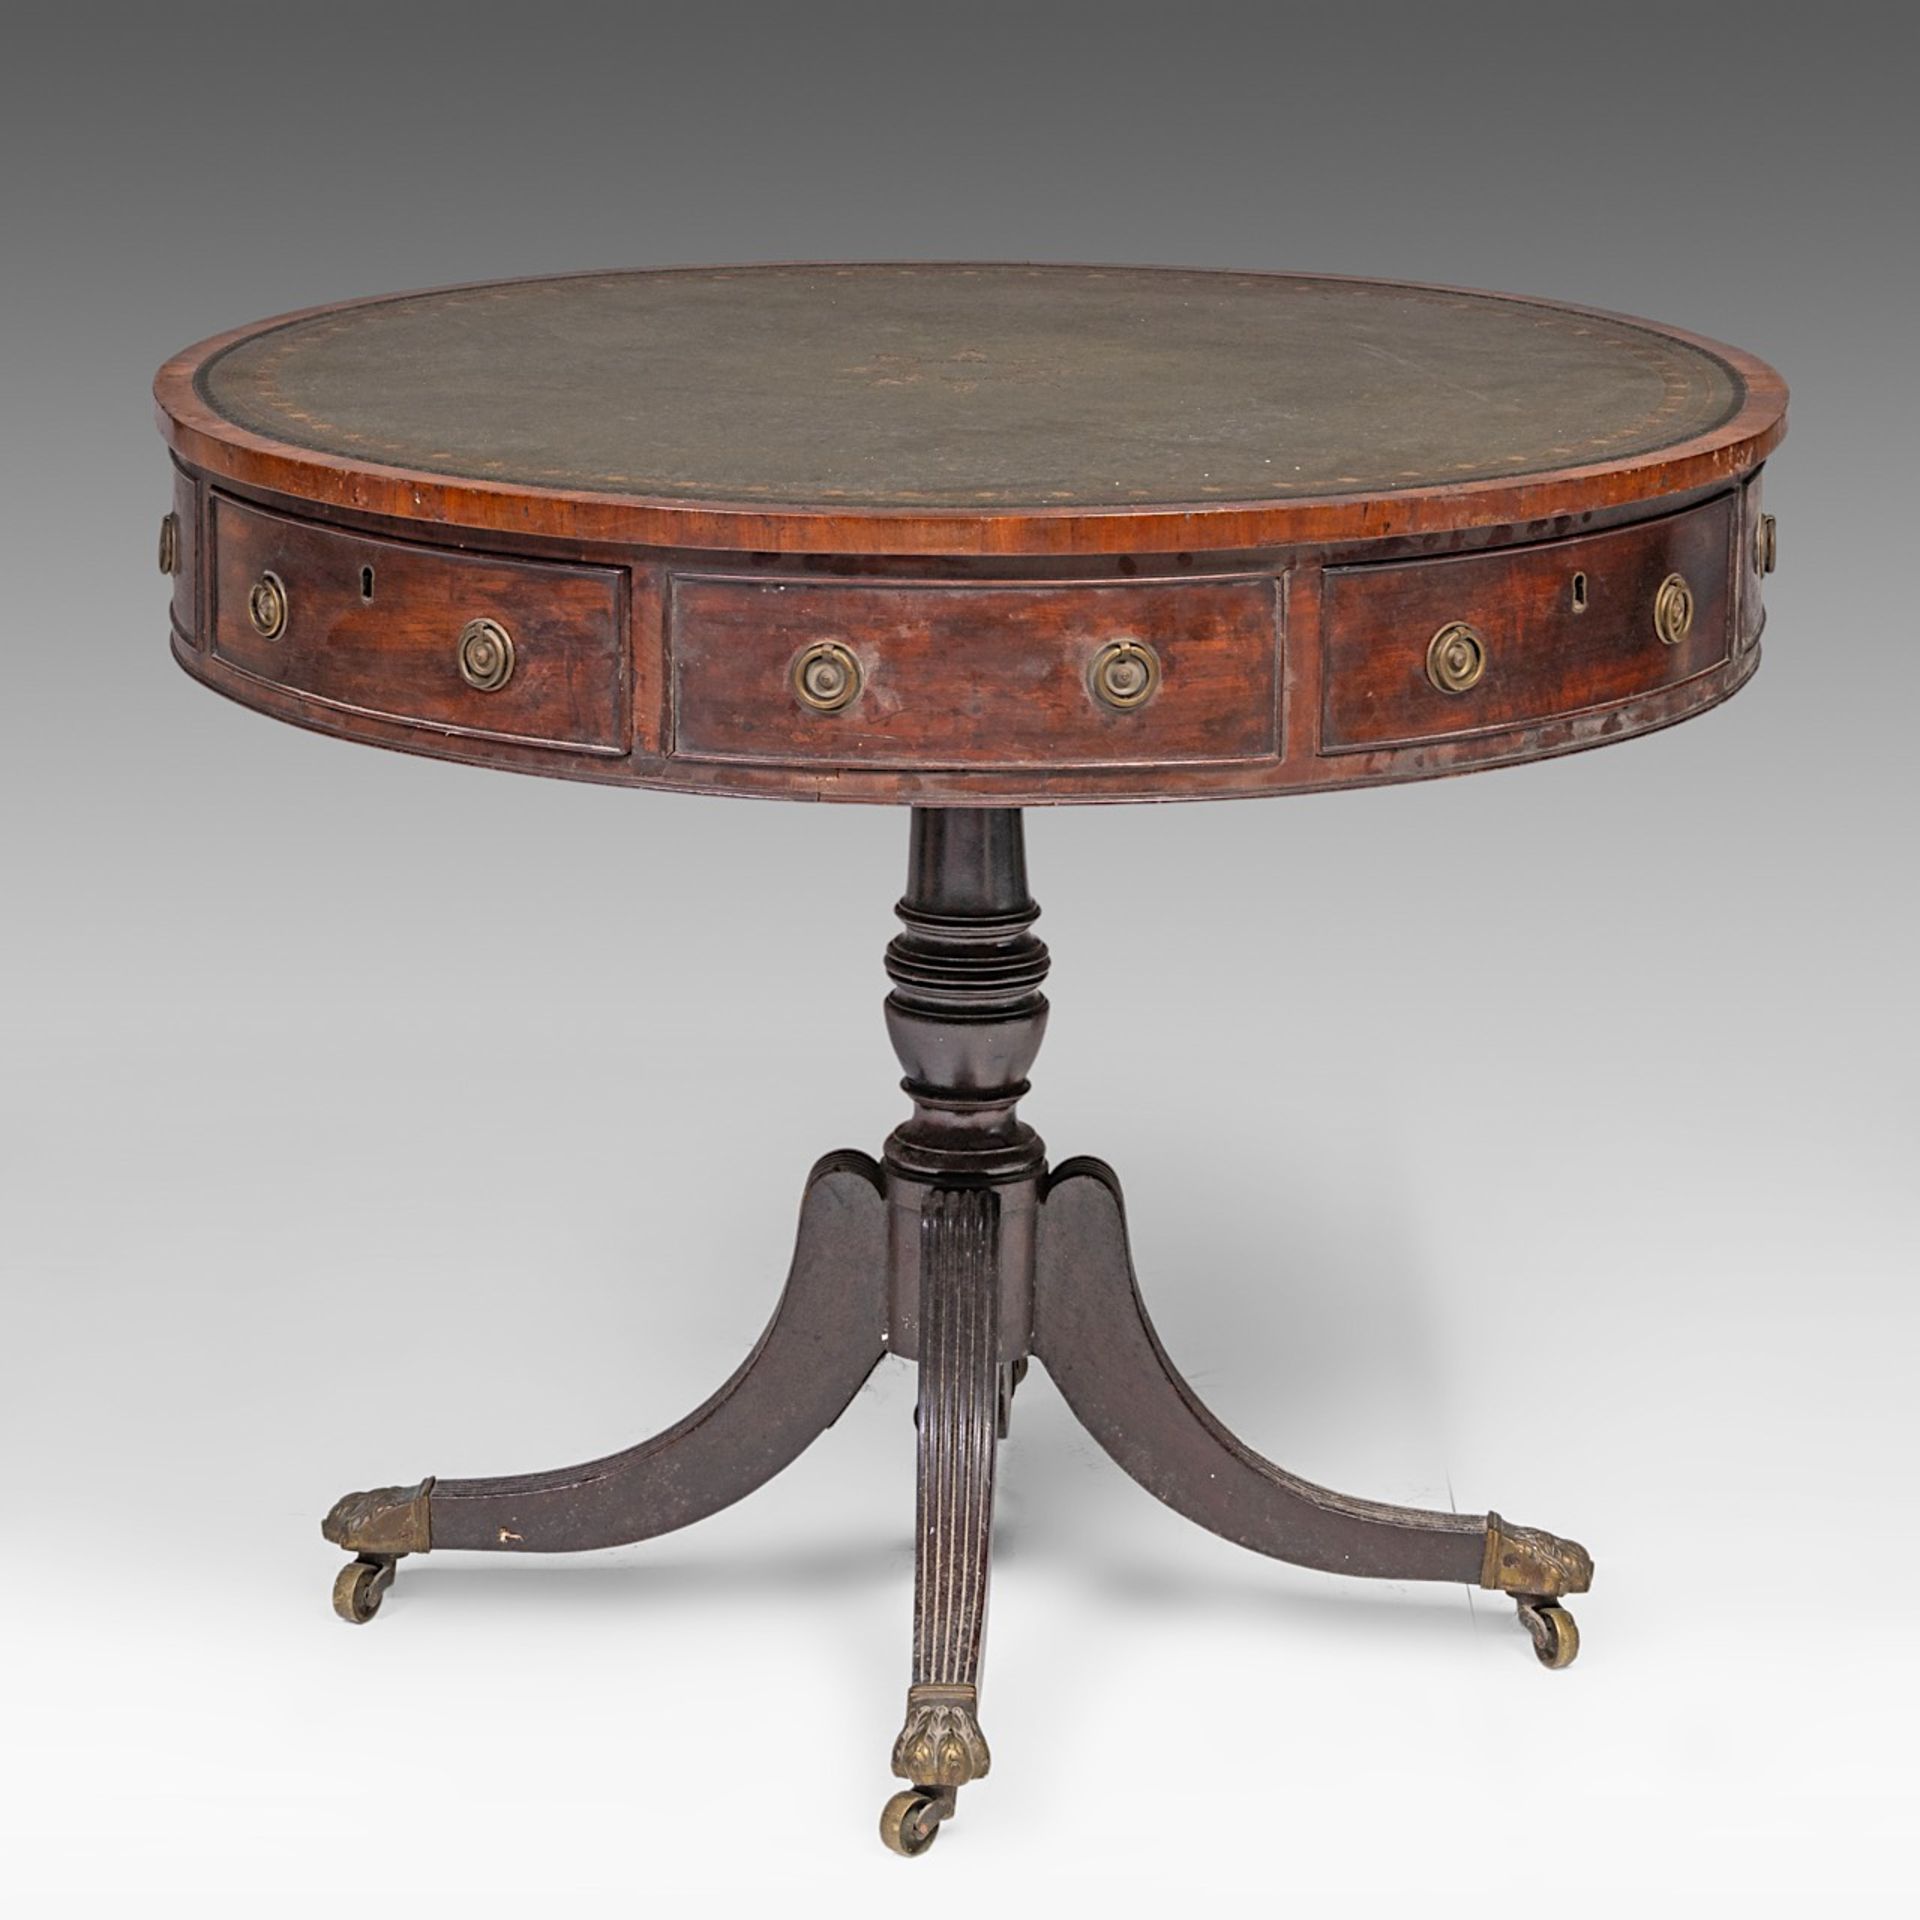 An English revolving drum table, marked with a crowned WR, ca. 1800, H 74 cm - dia 91 cm - Image 2 of 9